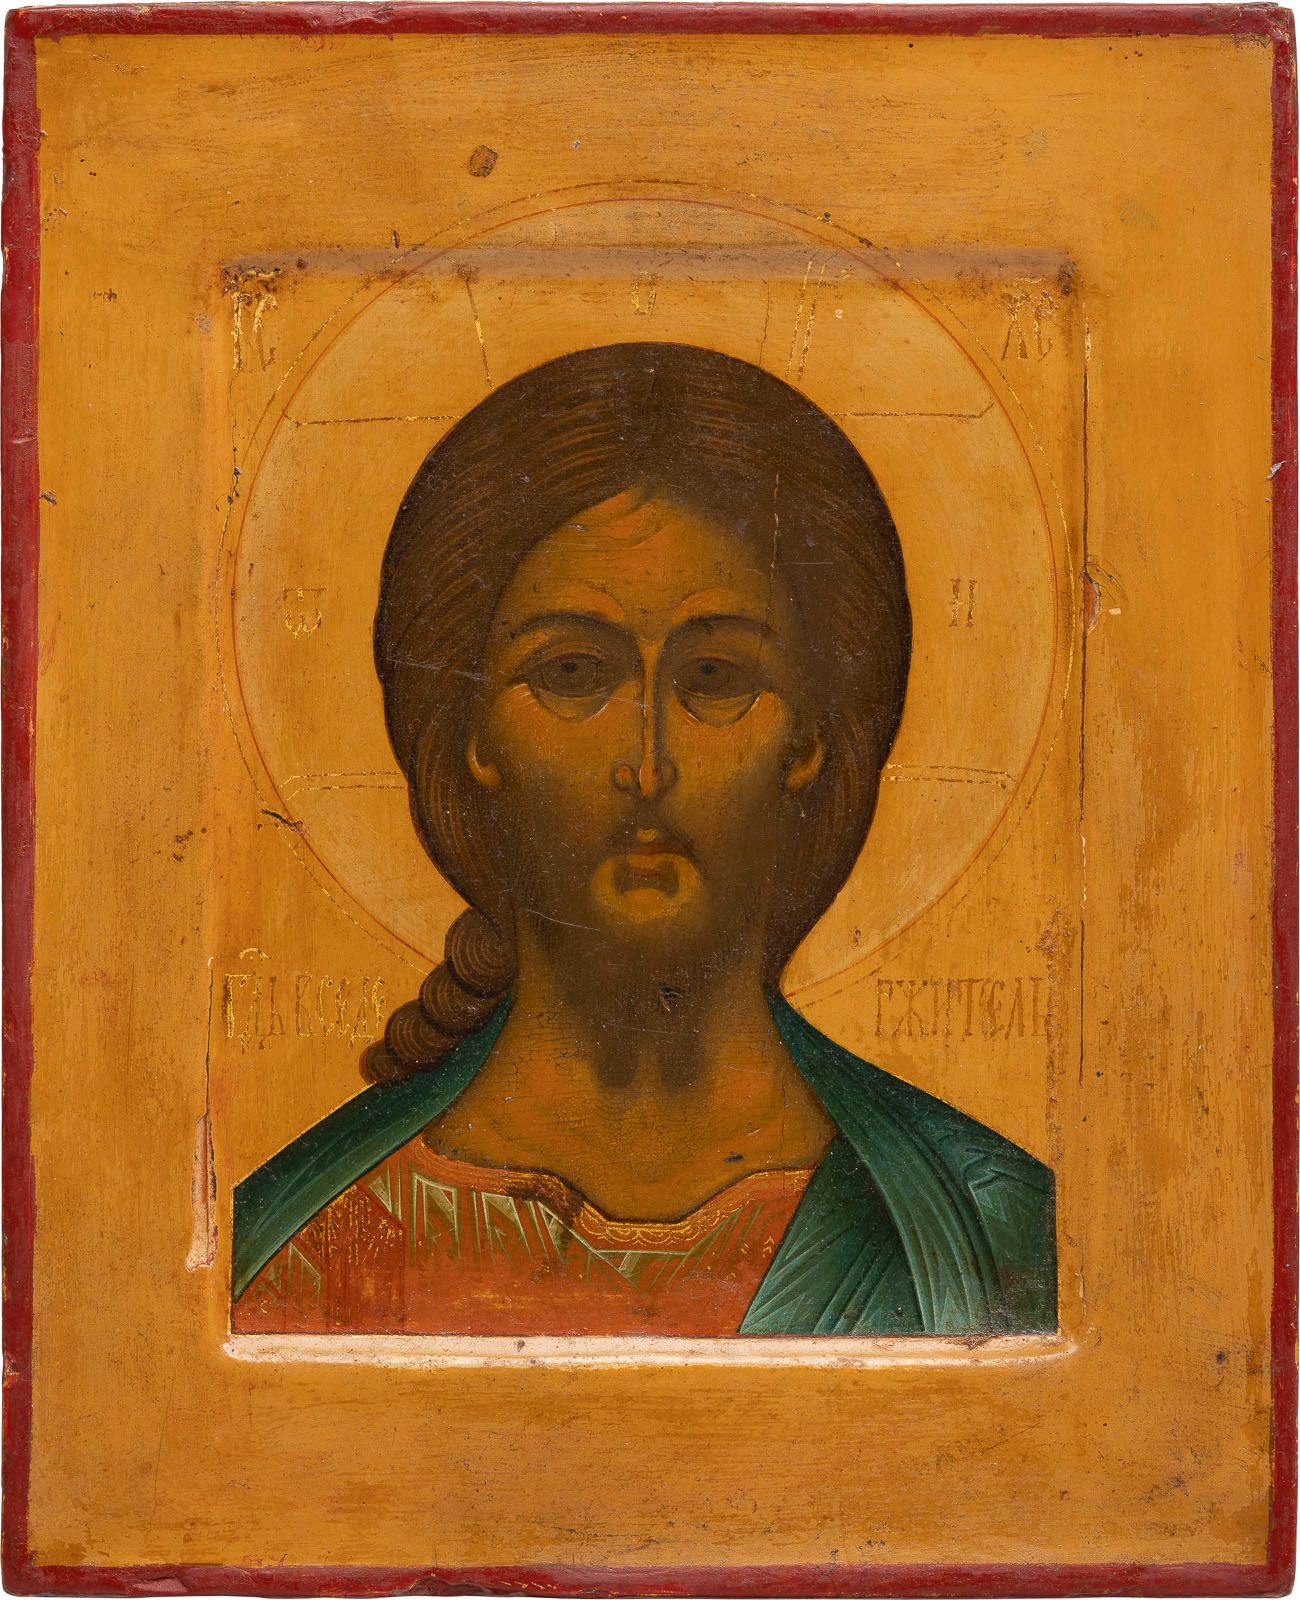 A SMALL ICON SHOWING CHRIST 'WITH THE FEARSOME EYE' KLEINE IKONE, DIE CHRISTUS '&hellip;